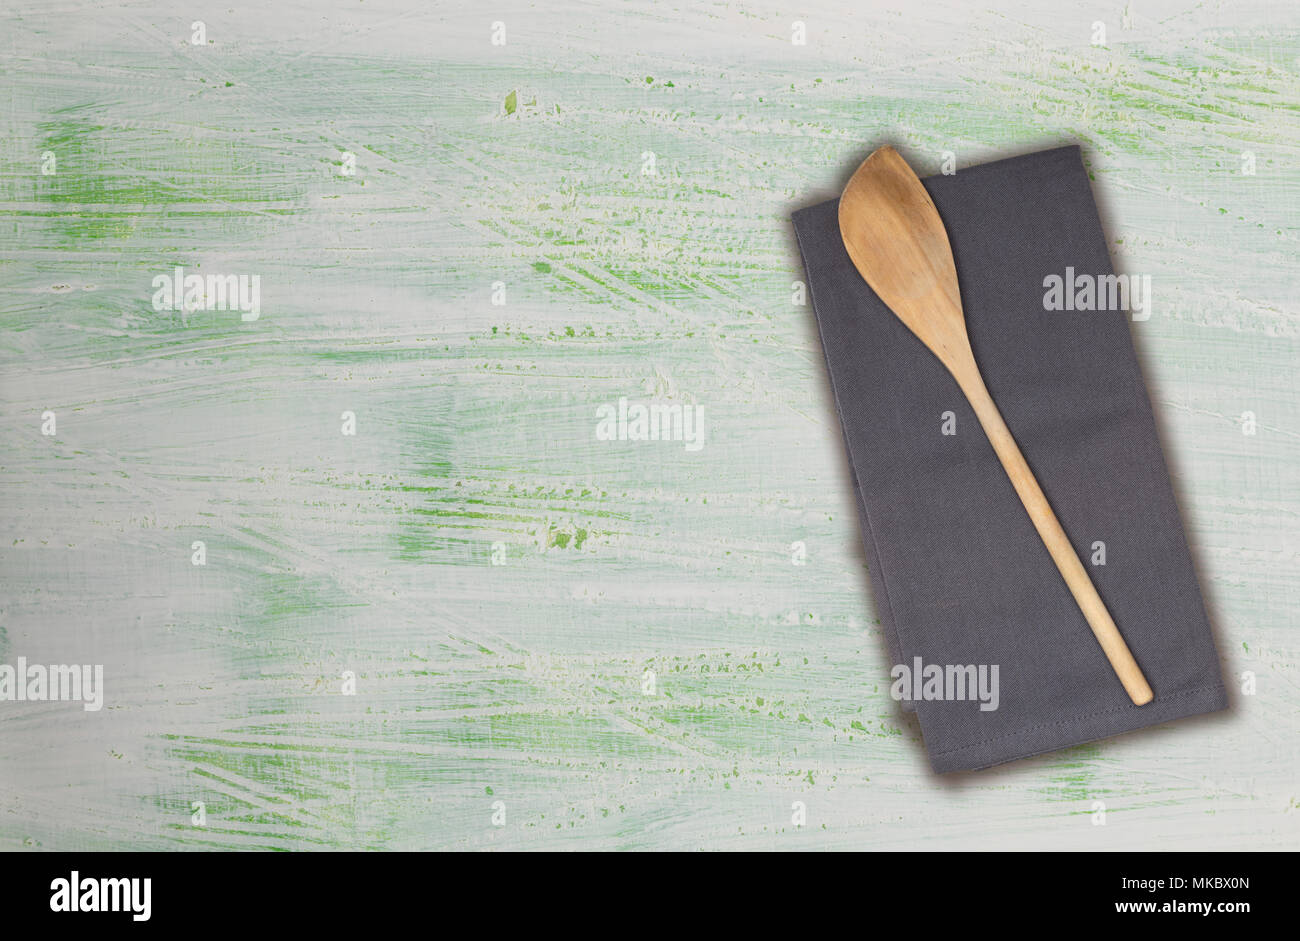 Wooden spoon and kitchen towel on green-white wood. Stock Photo